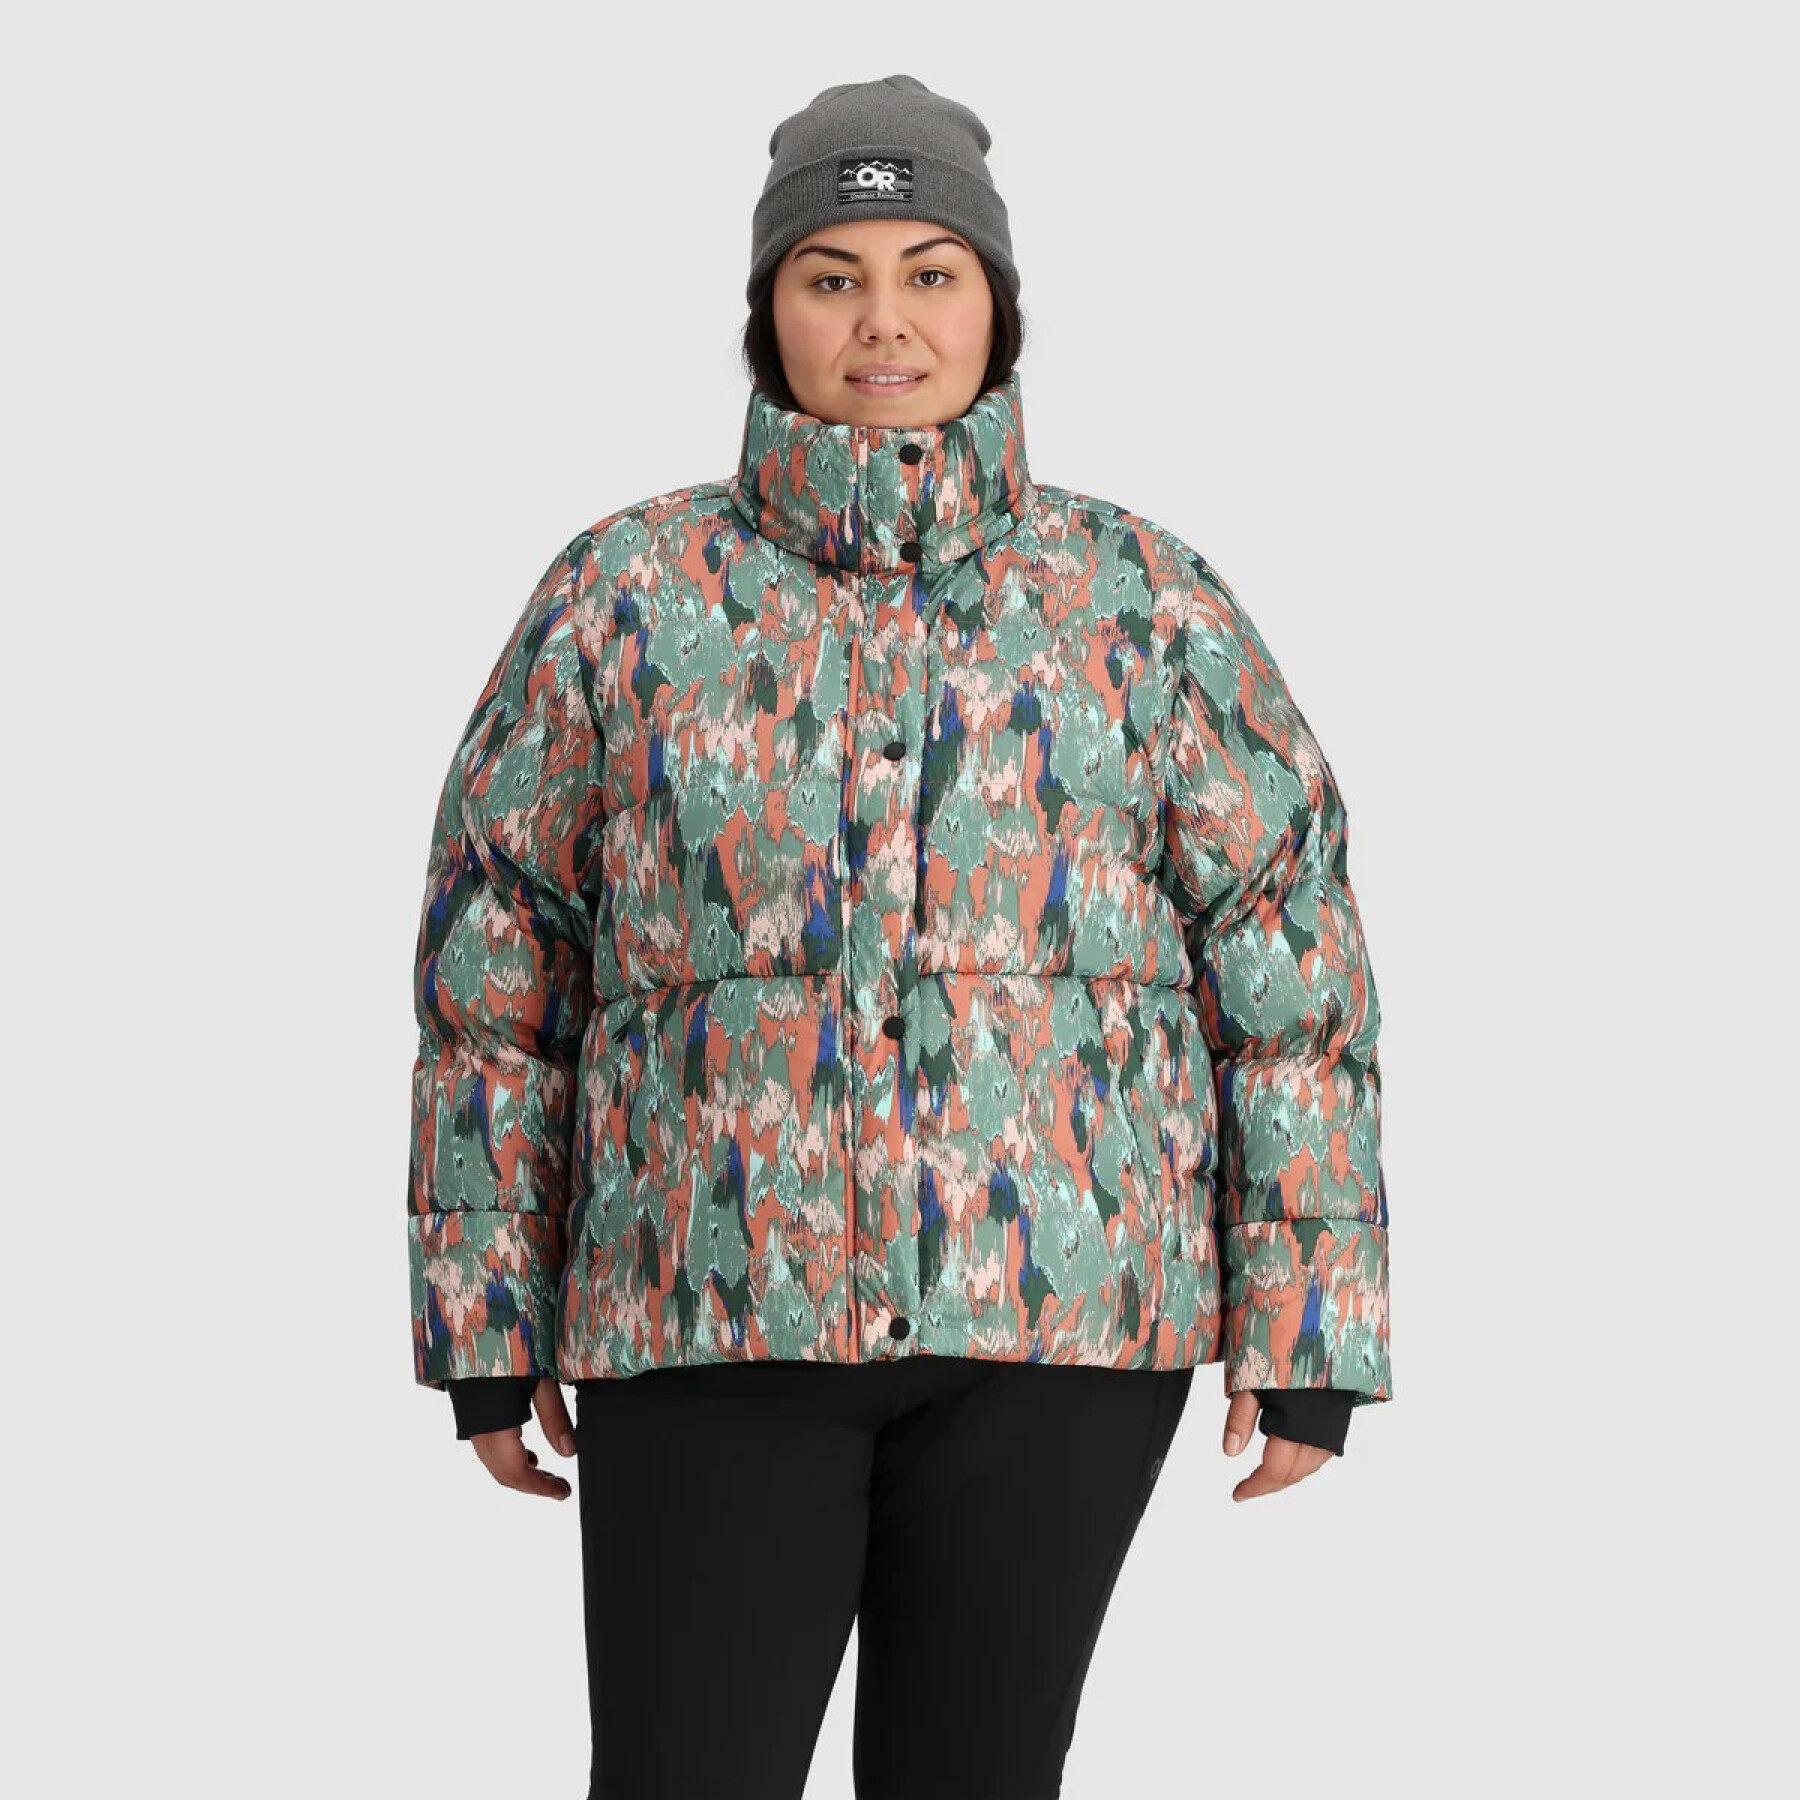 Women's down jacket Outdoor Research Coldfront Down Plus